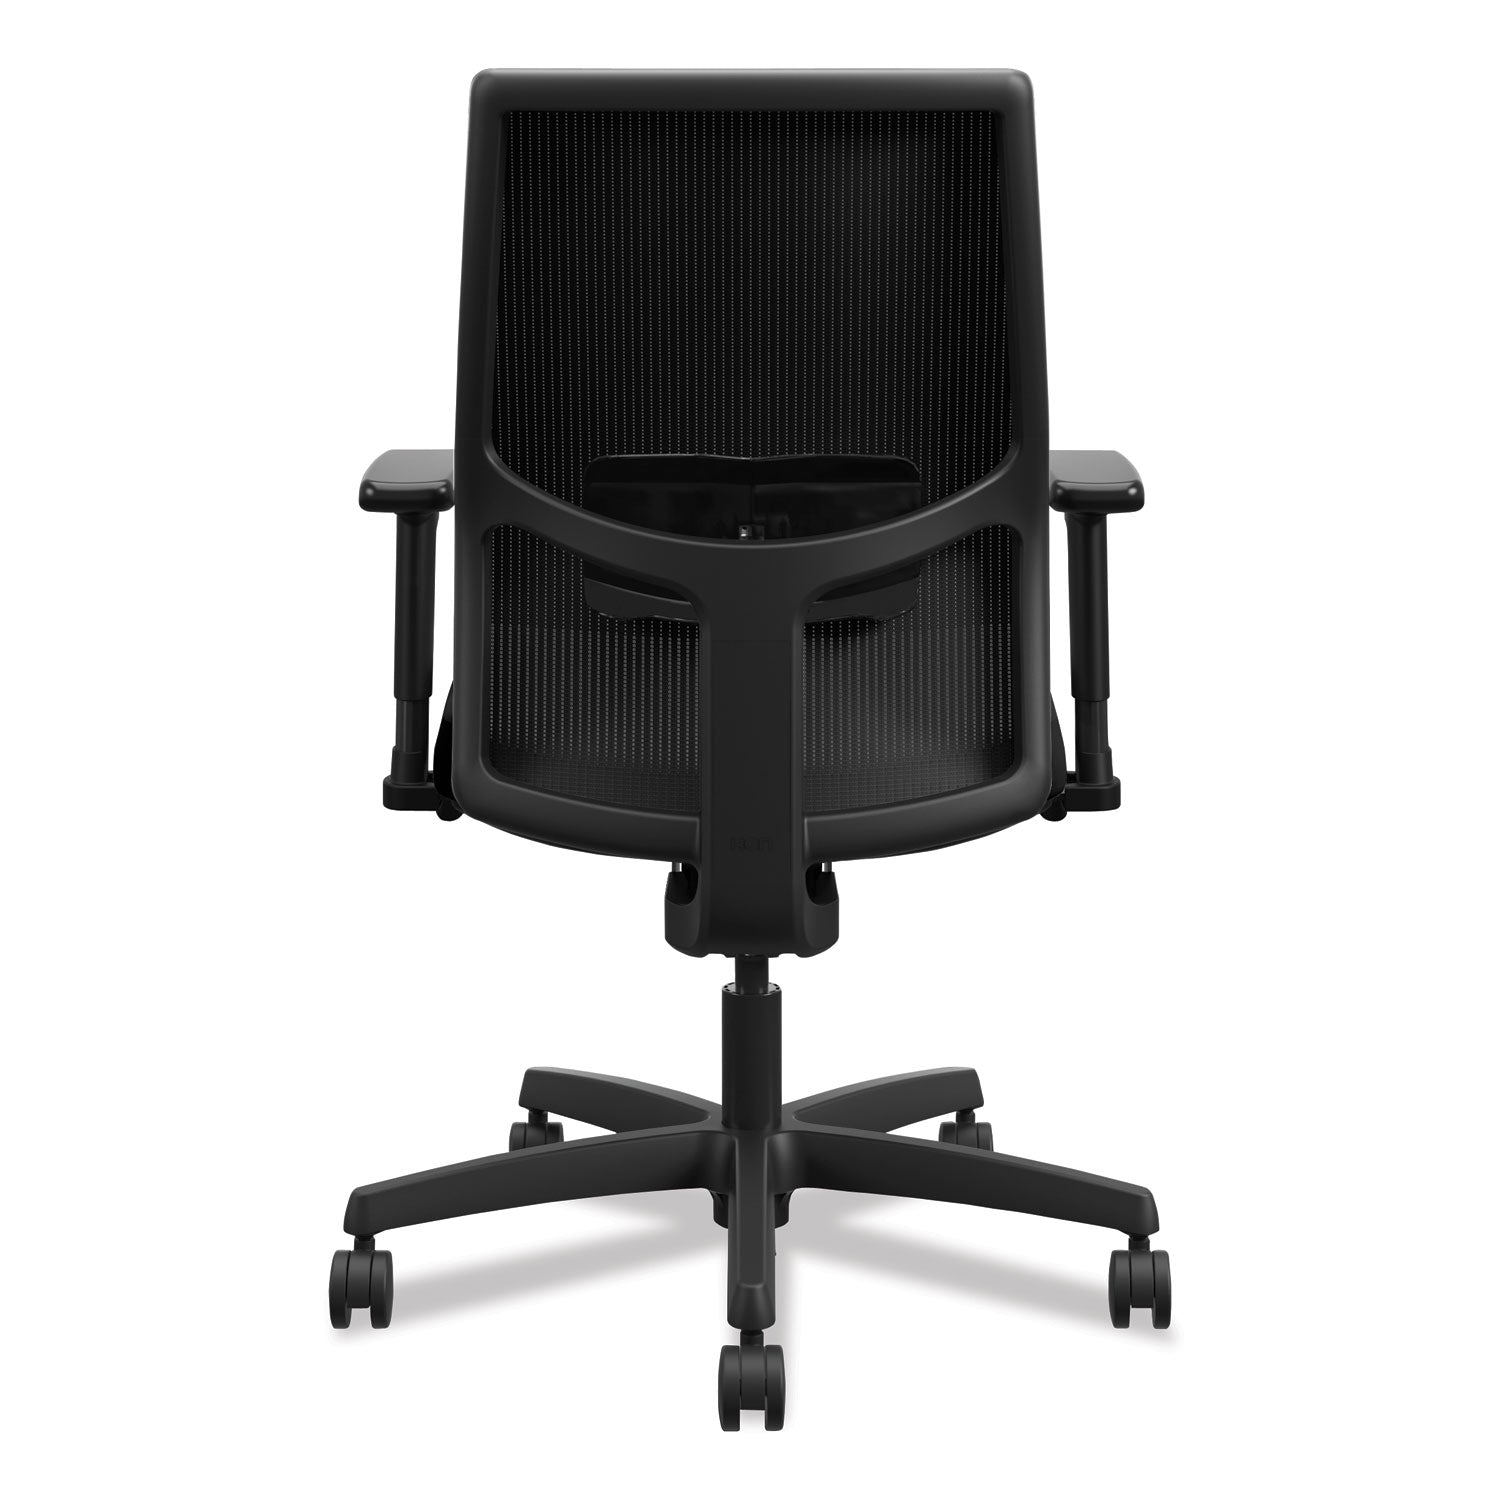 ignition-20-4-way-stretch-low-back-mesh-task-chair-supports-up-to-300-lb-1675-to-2125-seat-height-black_honitlmk1mc10b - 5